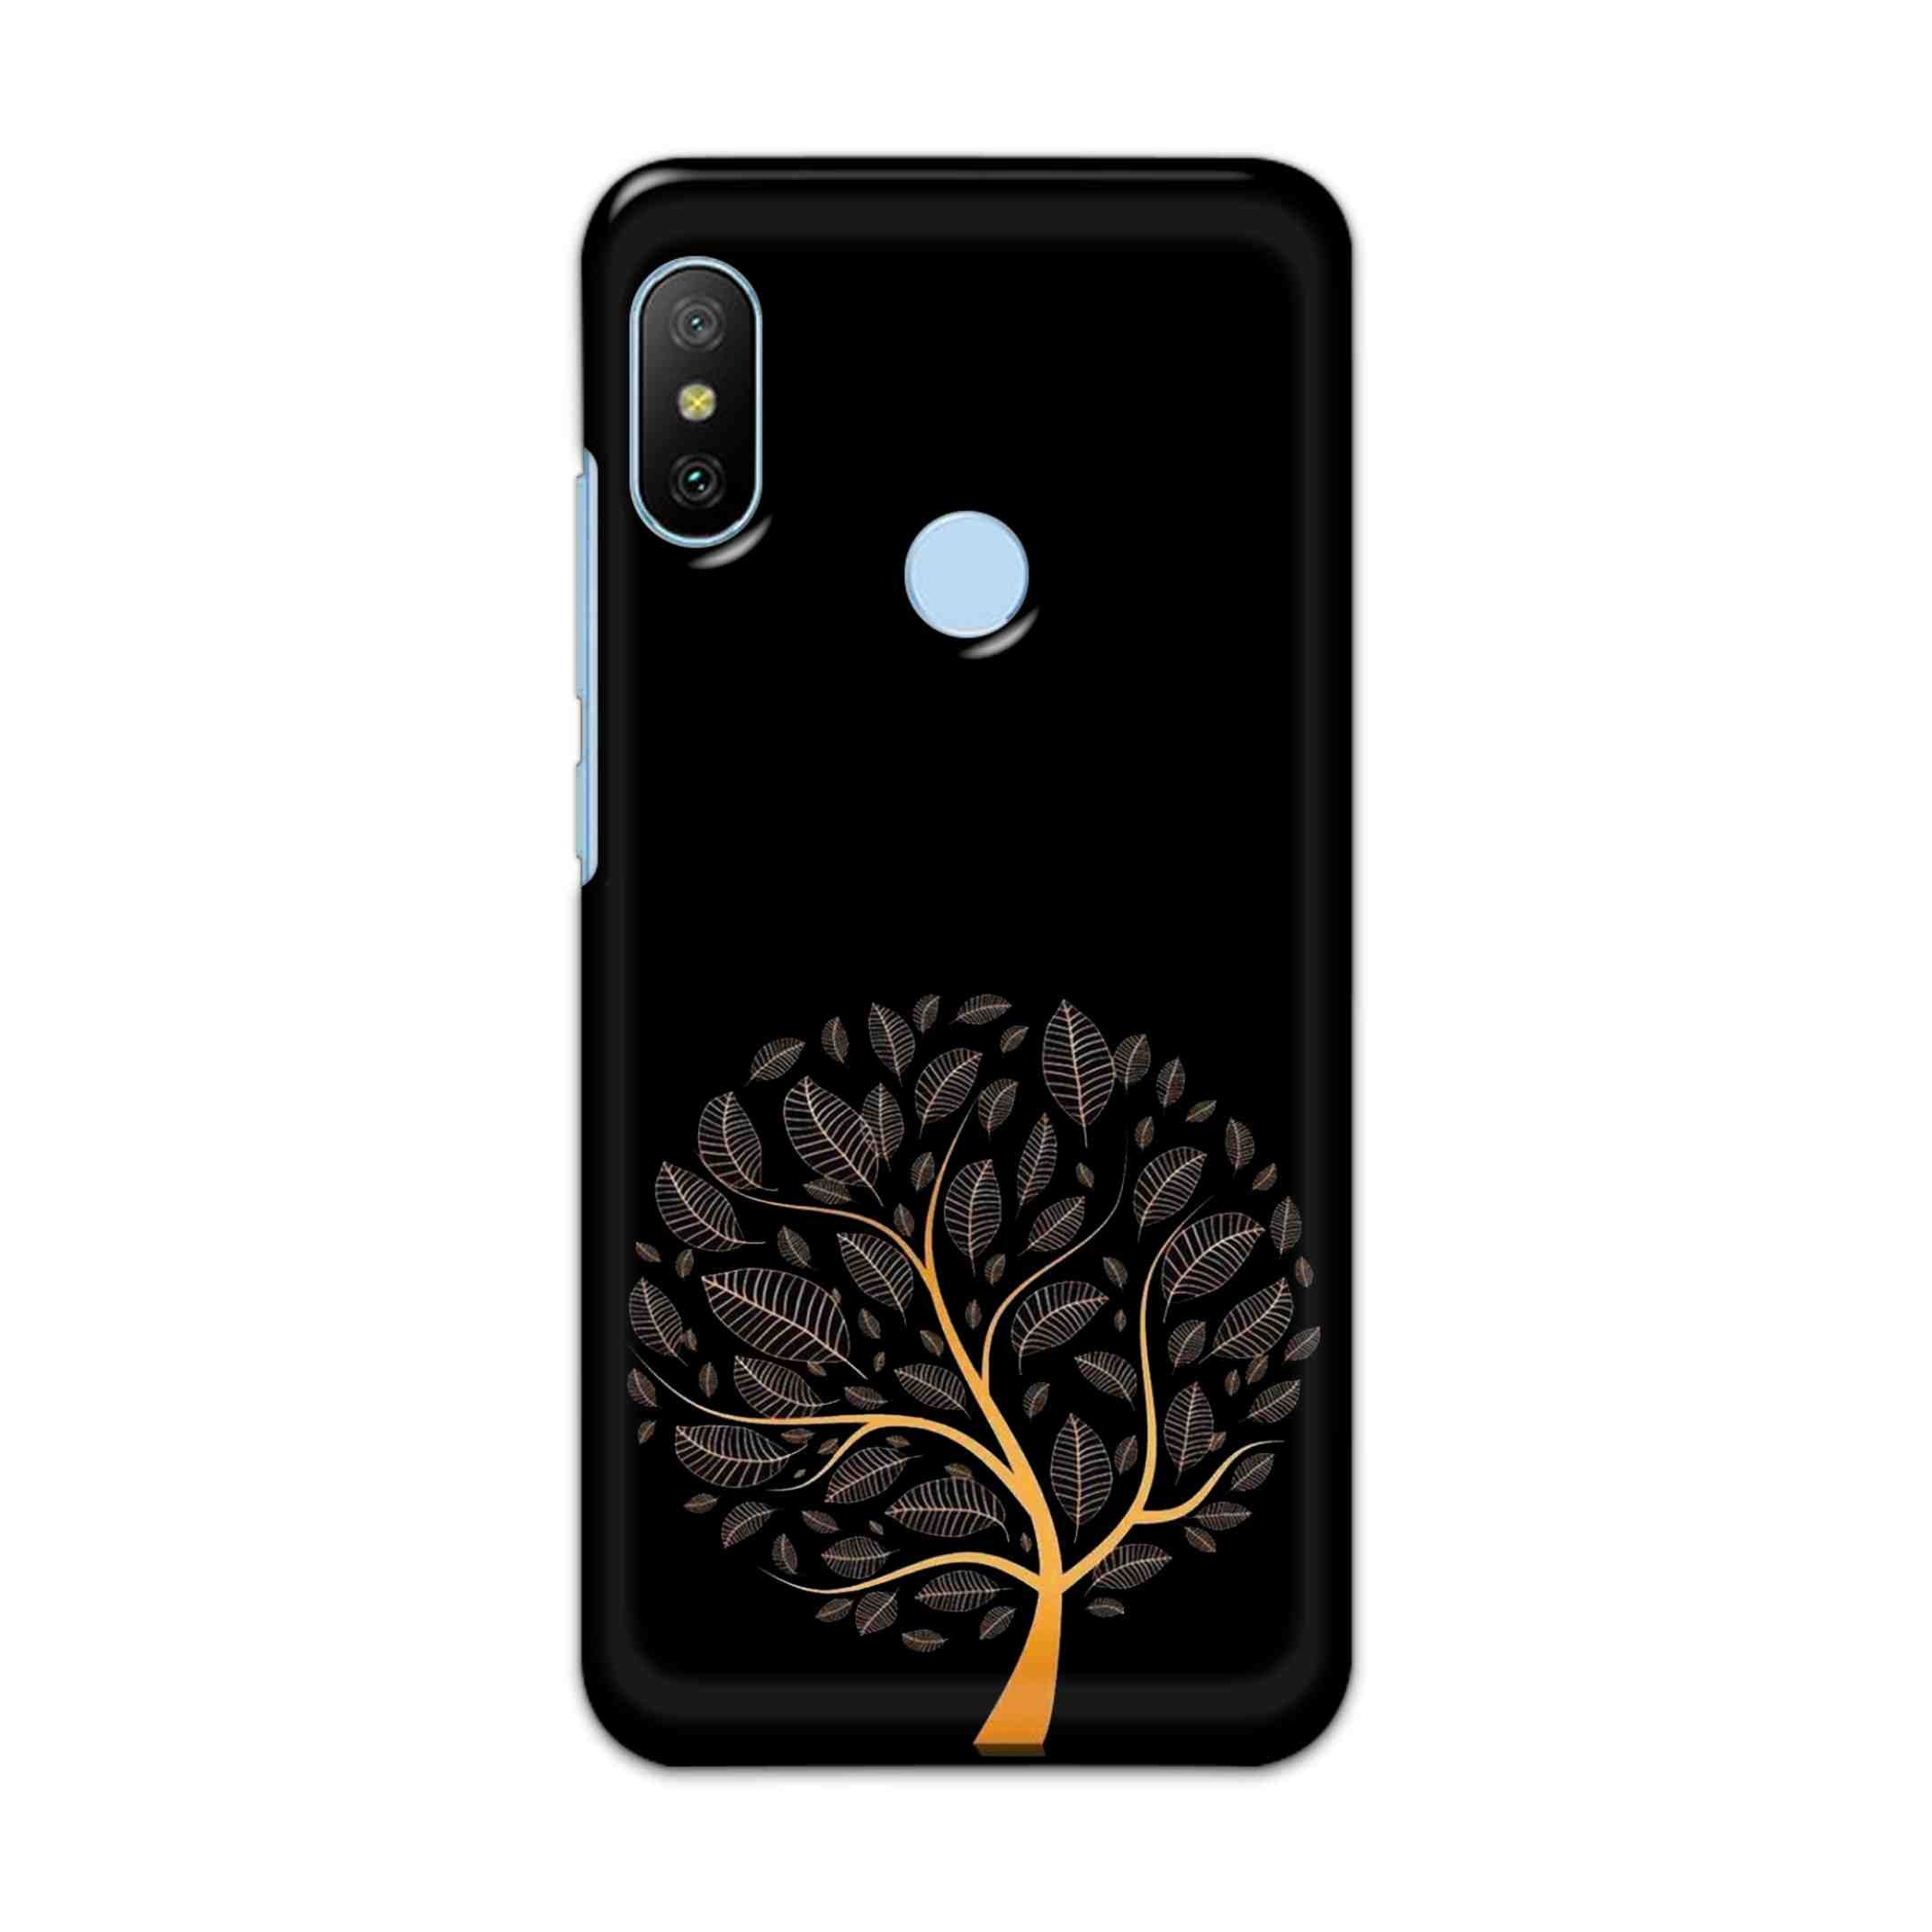 Buy Golden Tree Hard Back Mobile Phone Case/Cover For Xiaomi Redmi 6 Pro Online